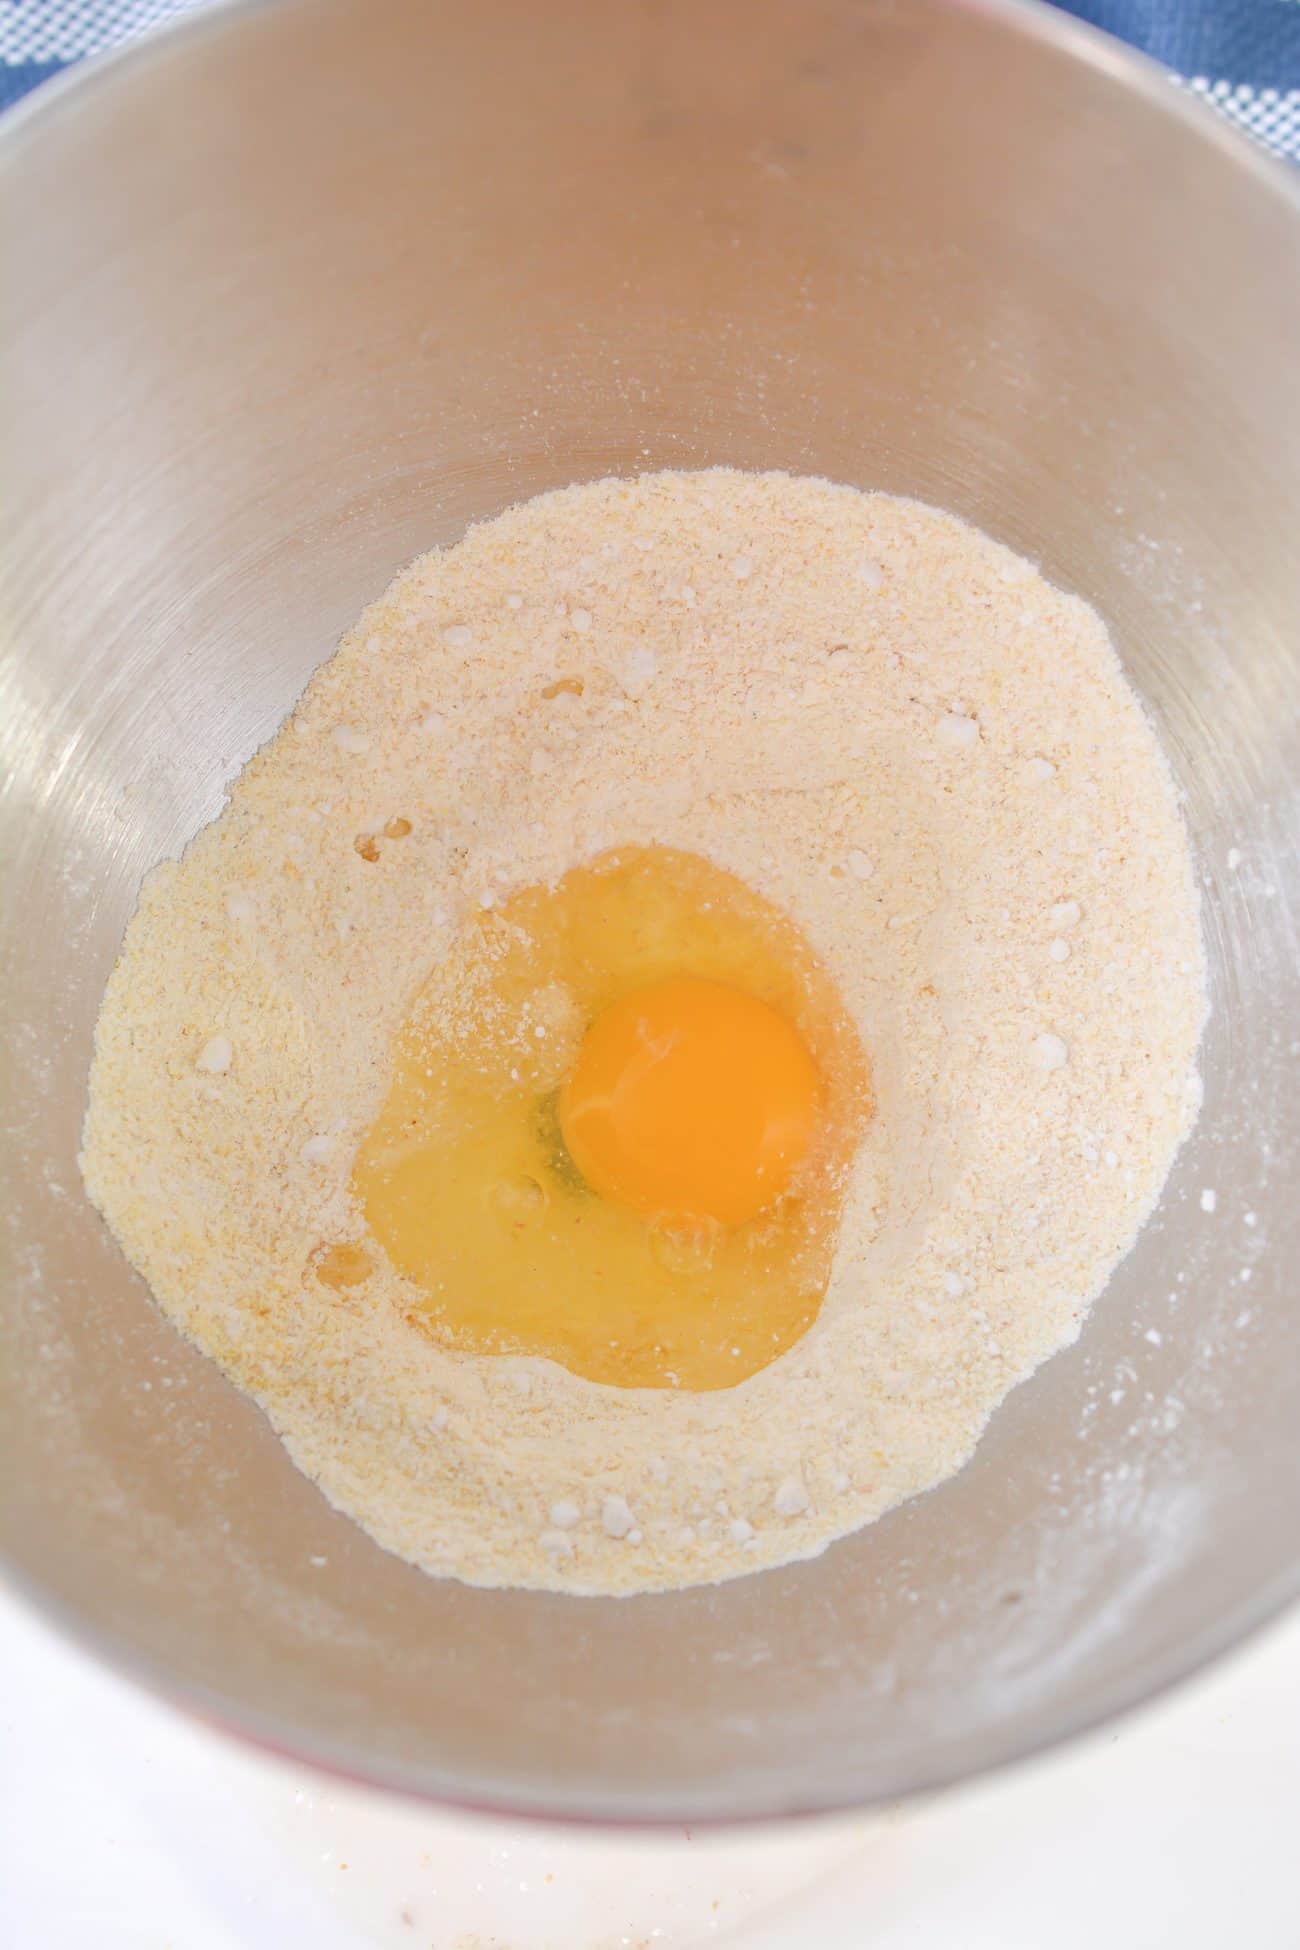 Mix in 1 large egg.